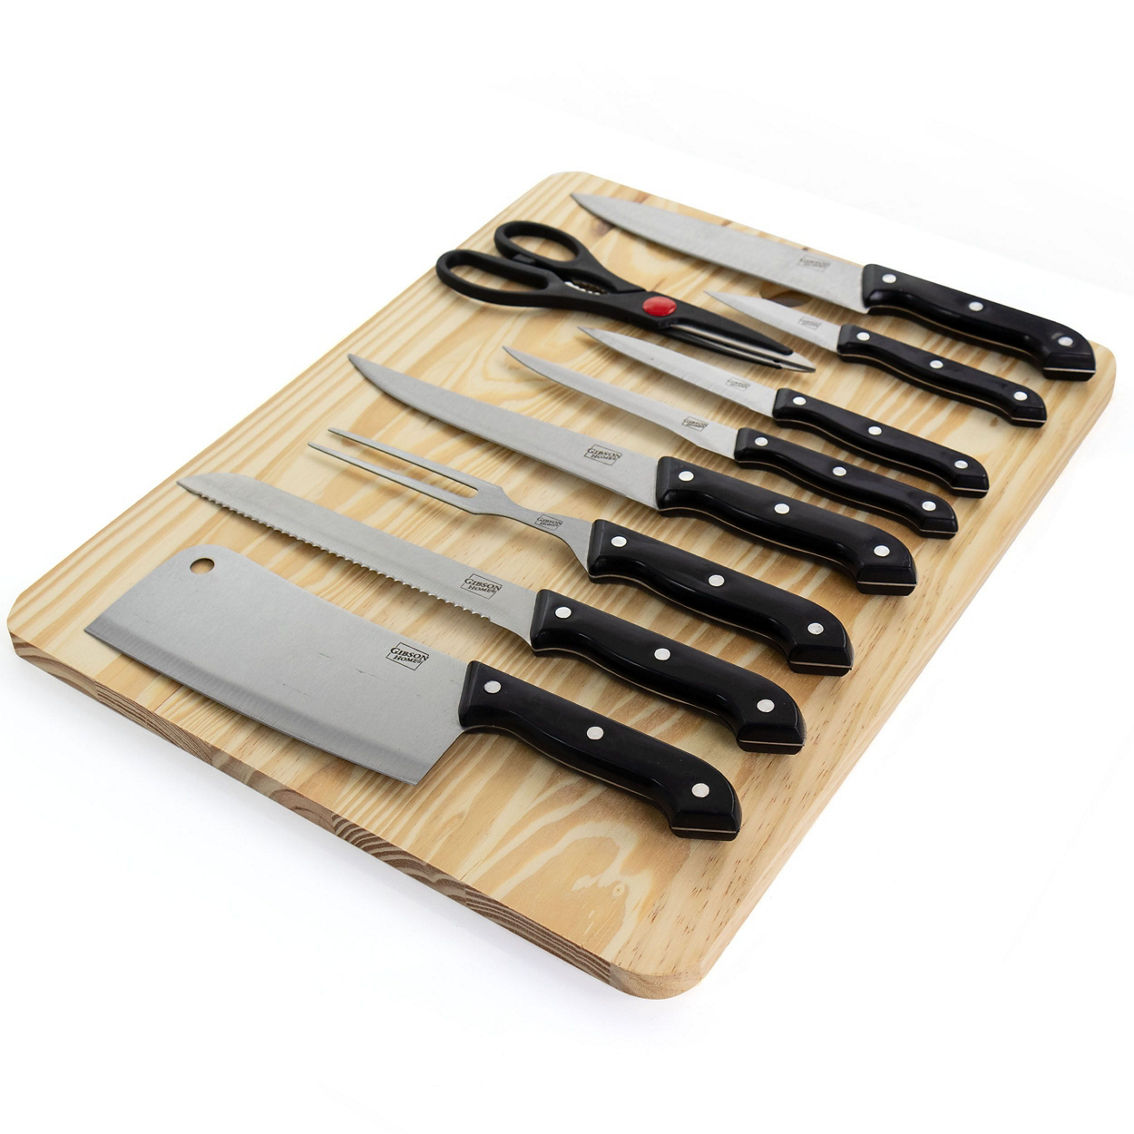 Gibson Home Wildcraft 10 Piece Cutlery Set with Wooden Cutting Board - Image 3 of 5